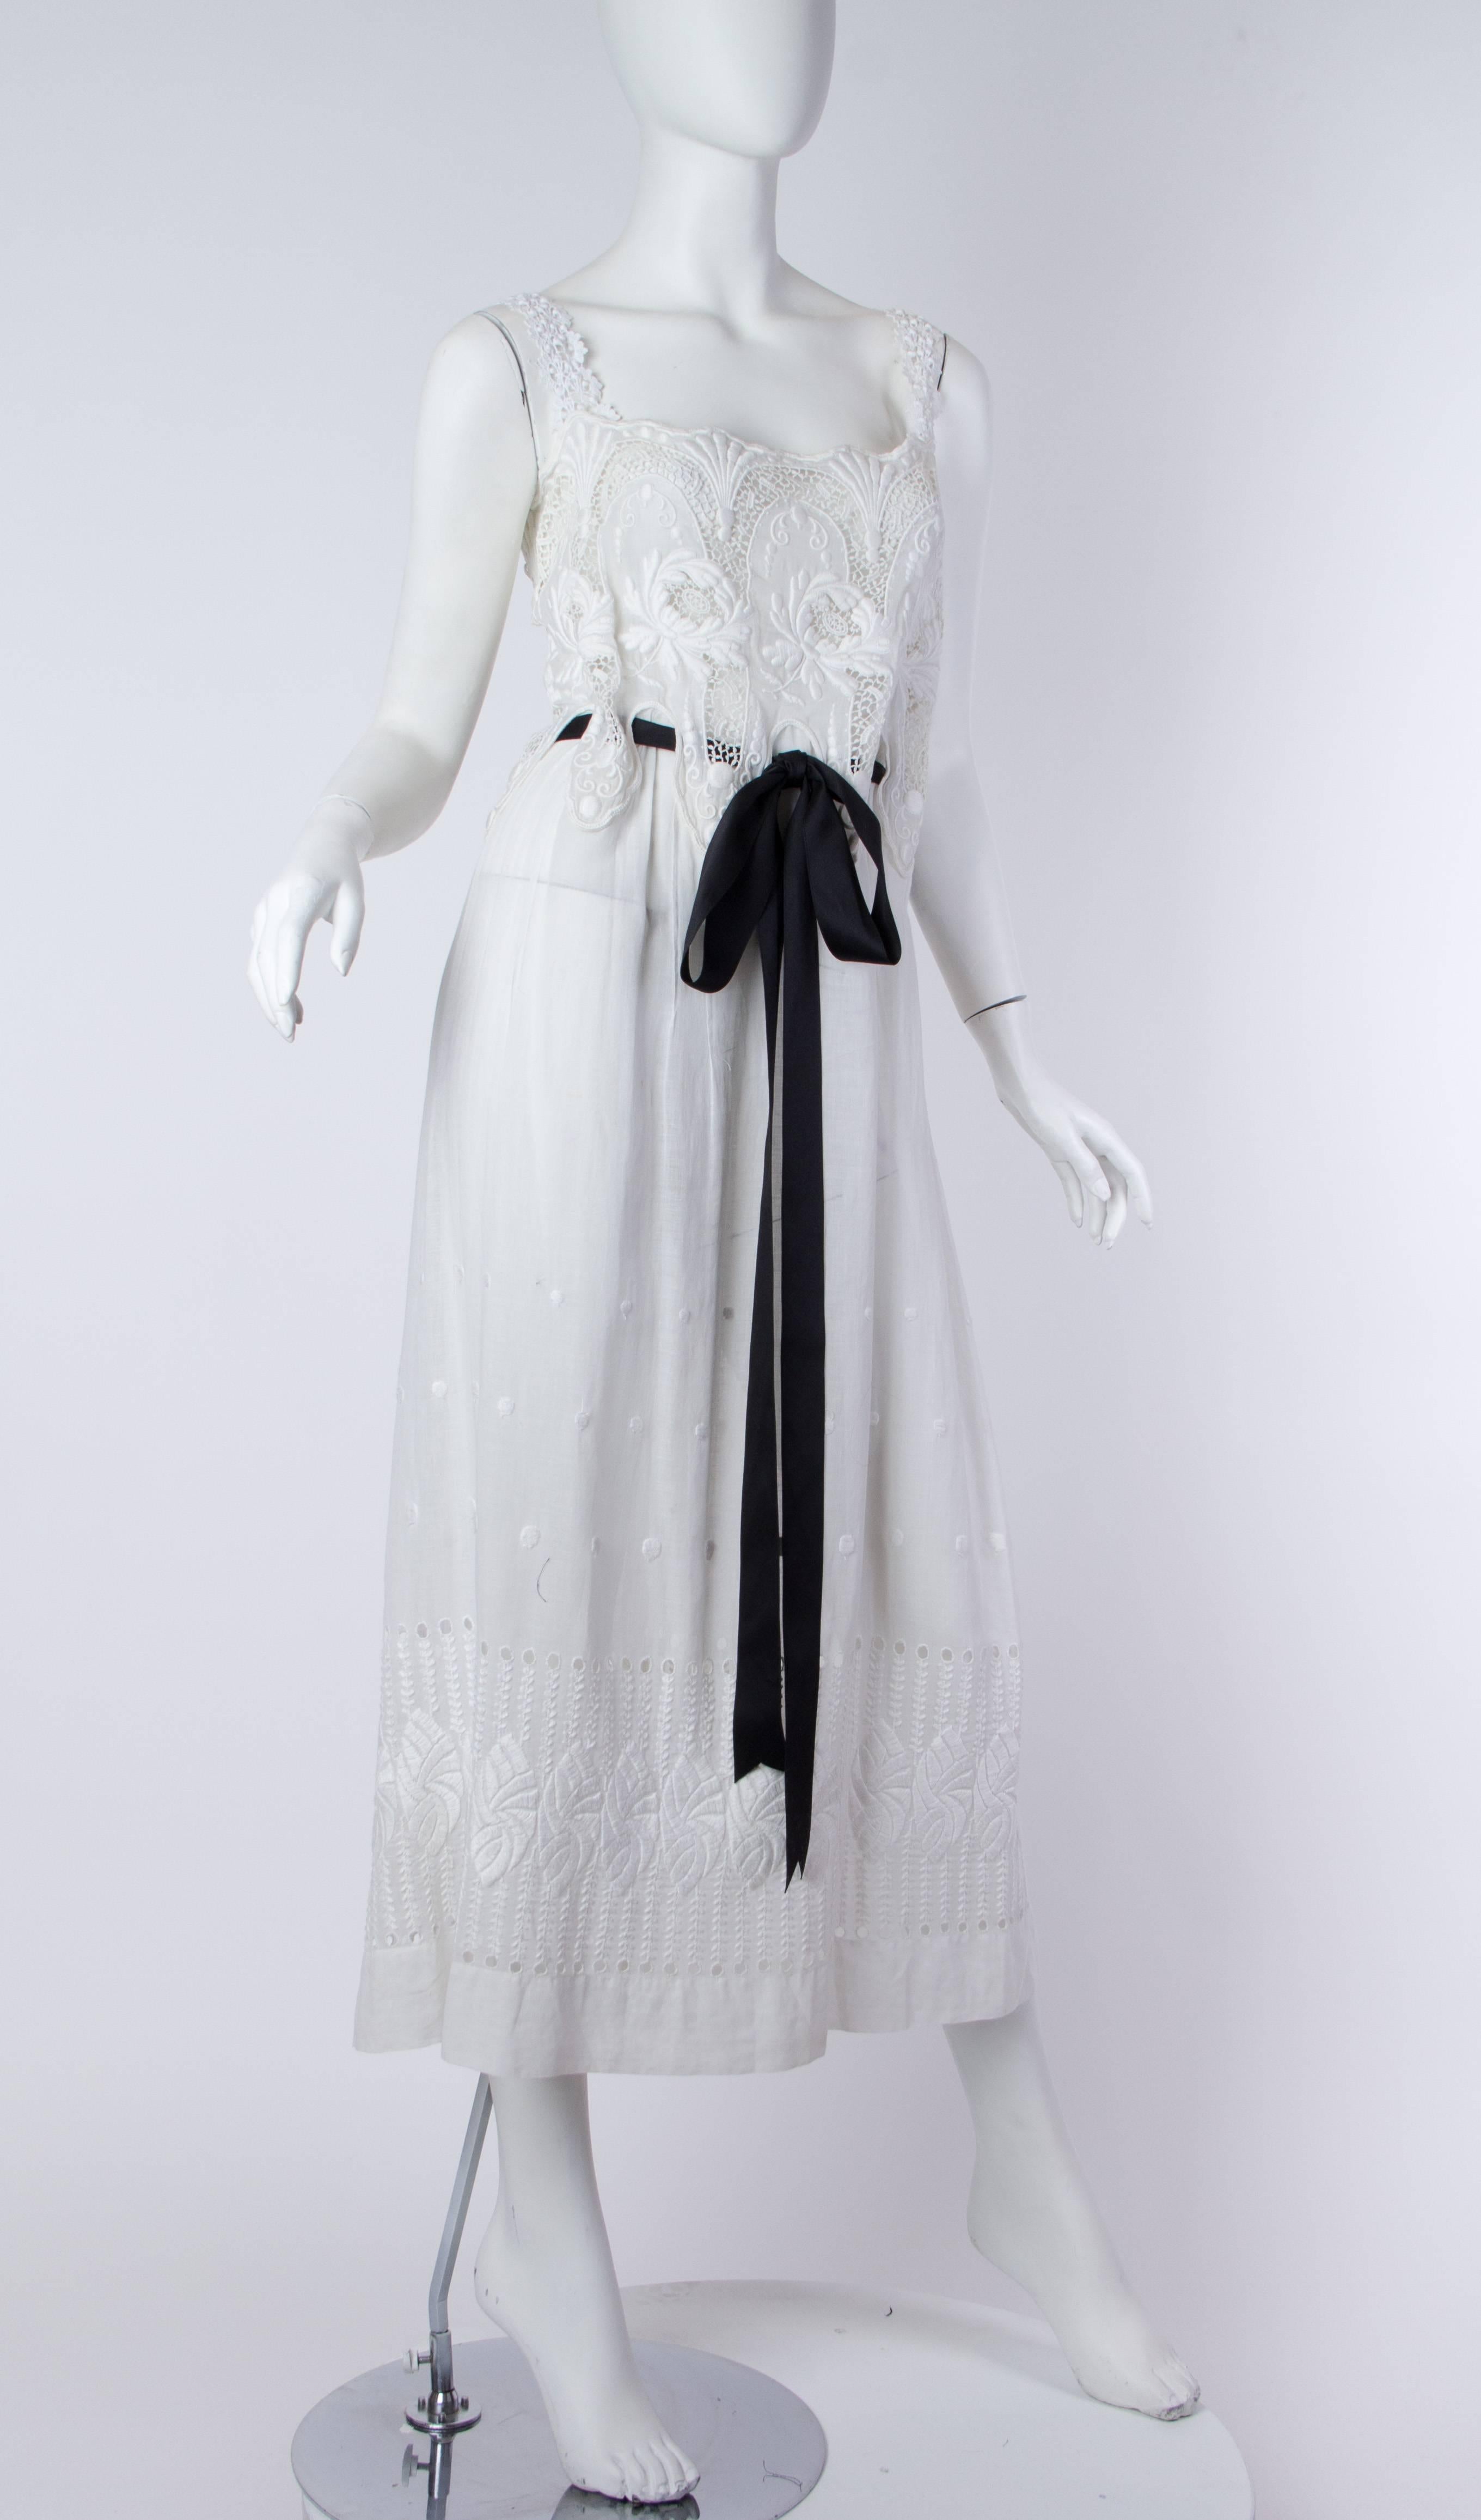 MORPHEW COLLECTION White Victorian Cotton Voile Dress With Lace Details & Black Ribbon Belt
MORPHEW COLLECTION is made entirely by hand in our NYC Ateliér of rare antique materials sourced from around the globe. Our sustainable vintage materials